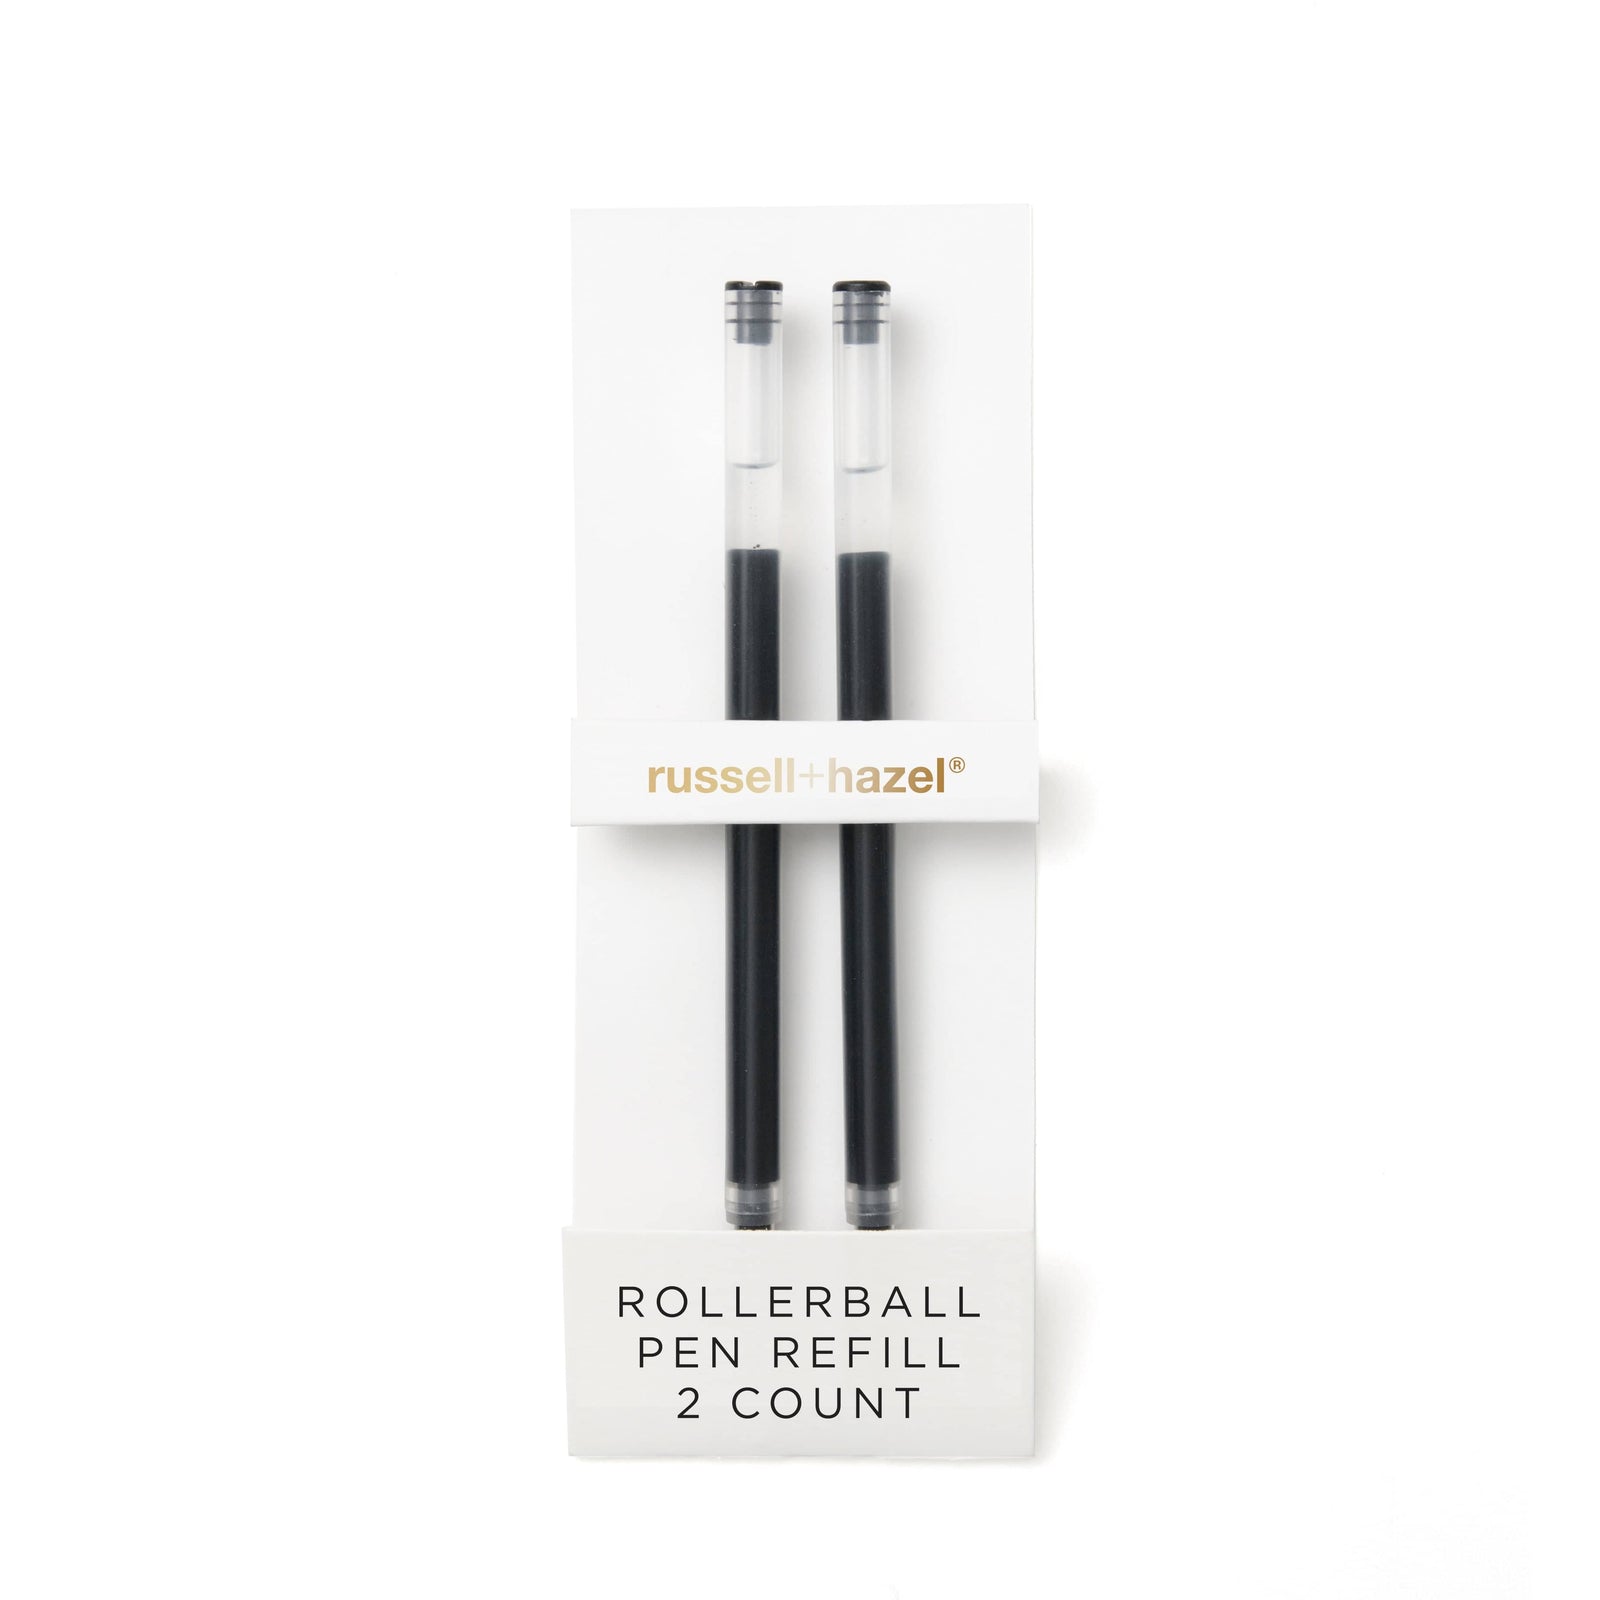 russell+hazel 2-Count White Wet Erase Markers